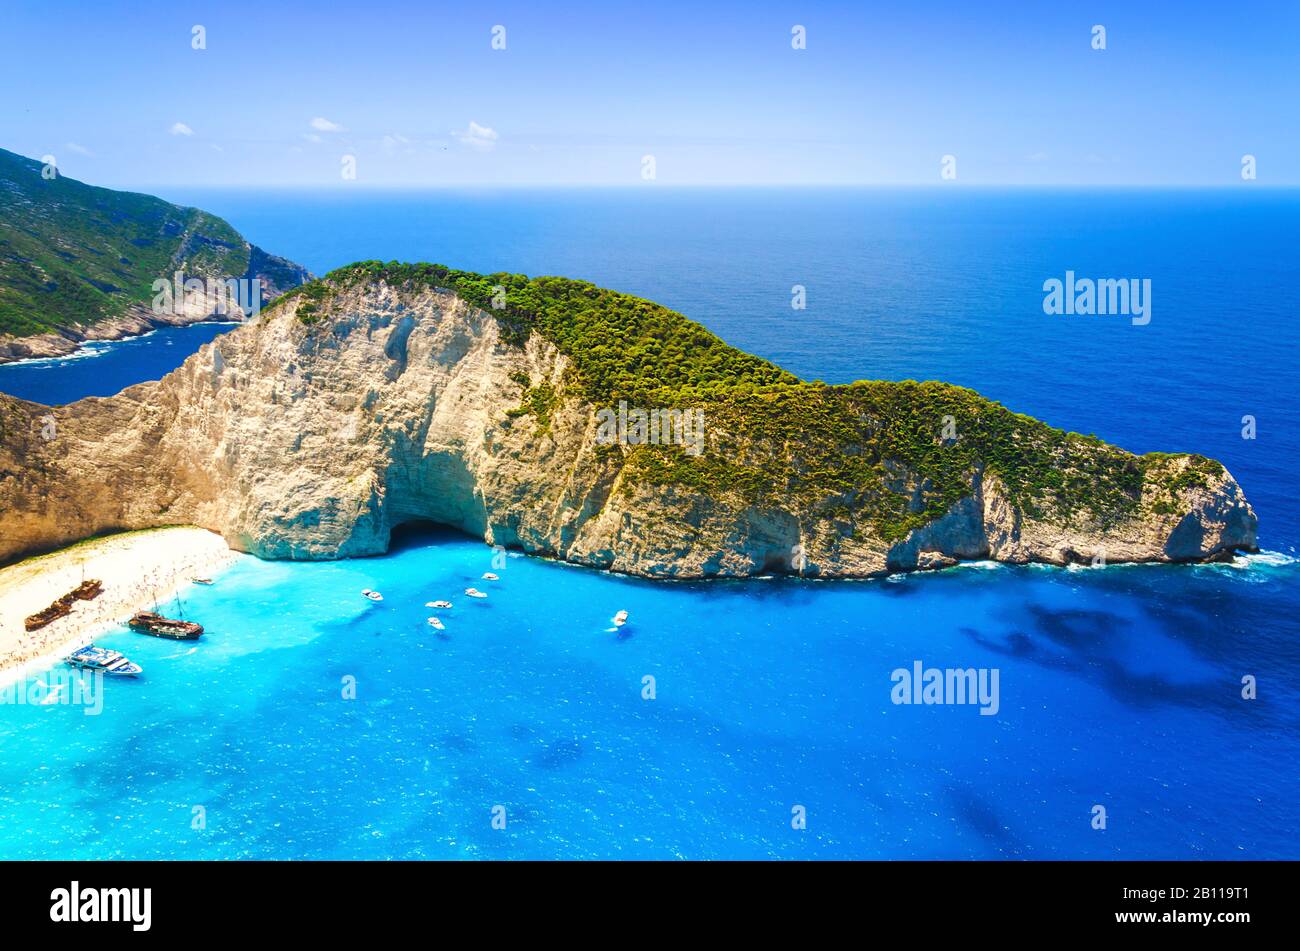 Shipwreck beach. Navagio bay. Zakynthos island, Greece. The most famous and fotographed beach in the world. Stock Photo